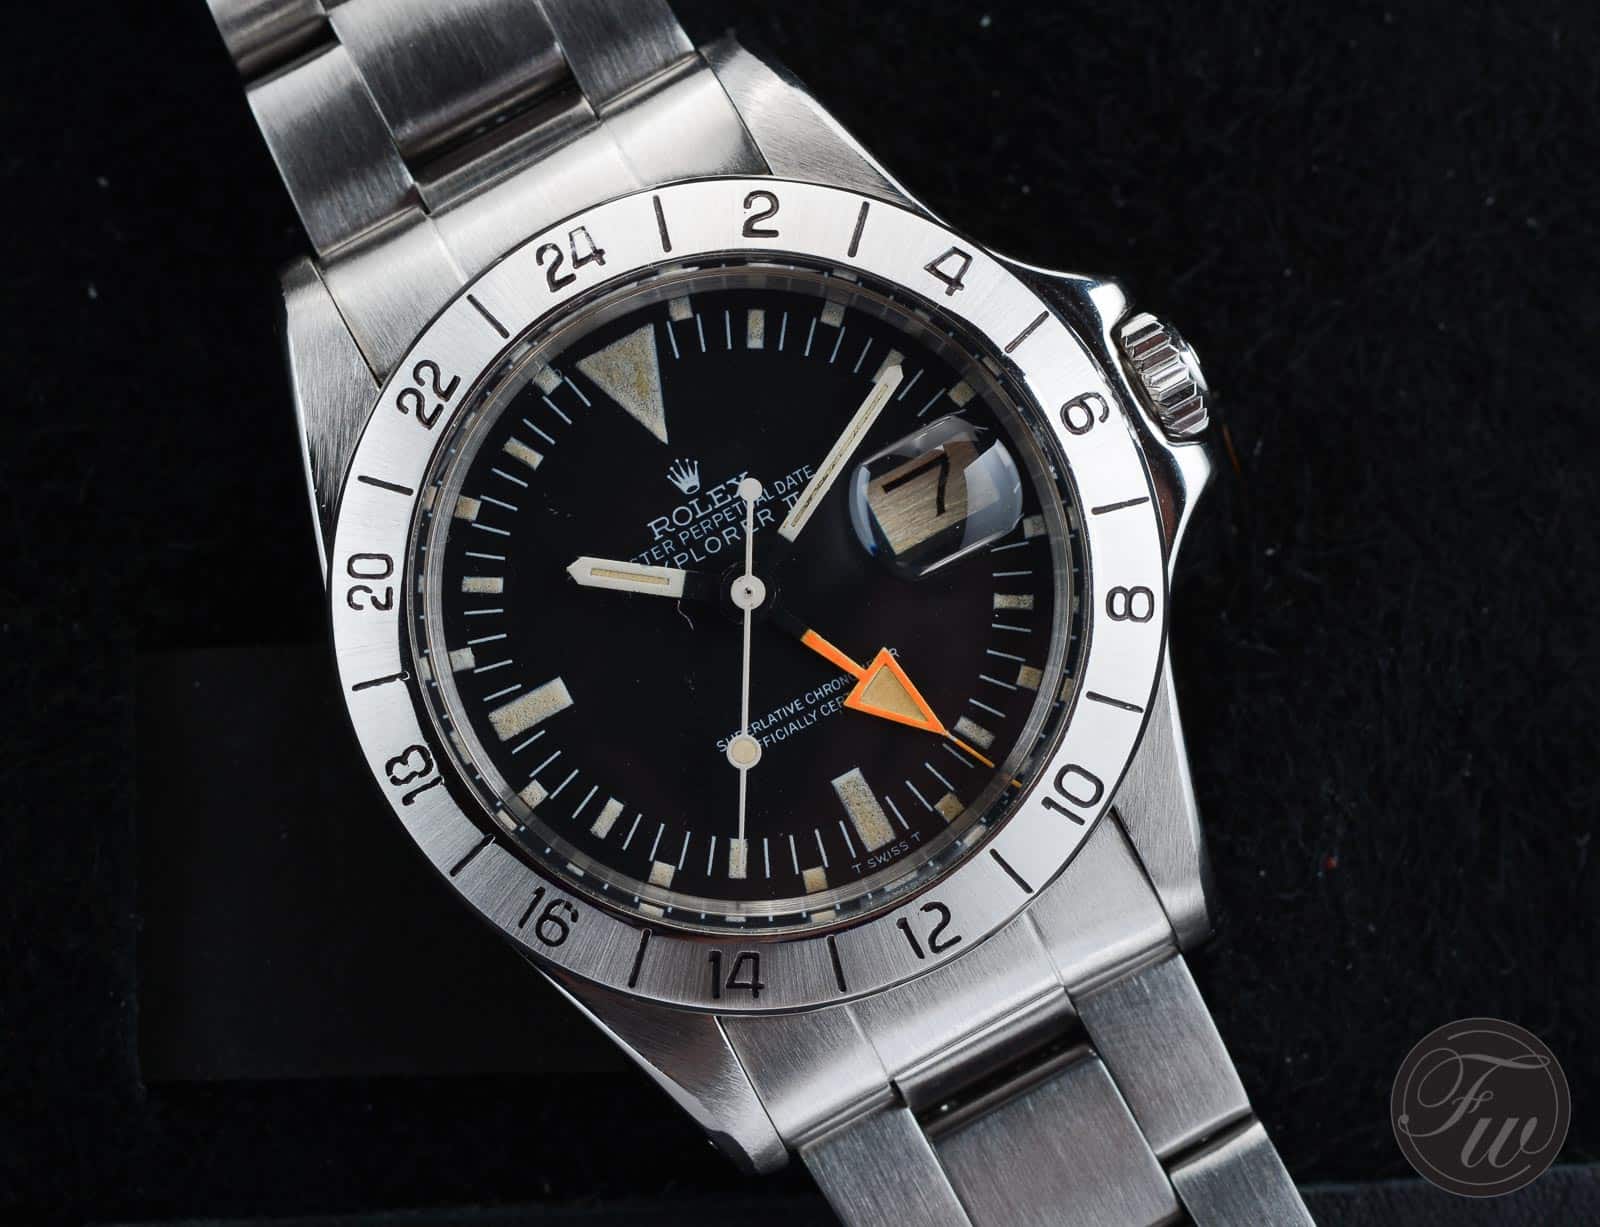 The Sports Rolex - The II Reference 1655